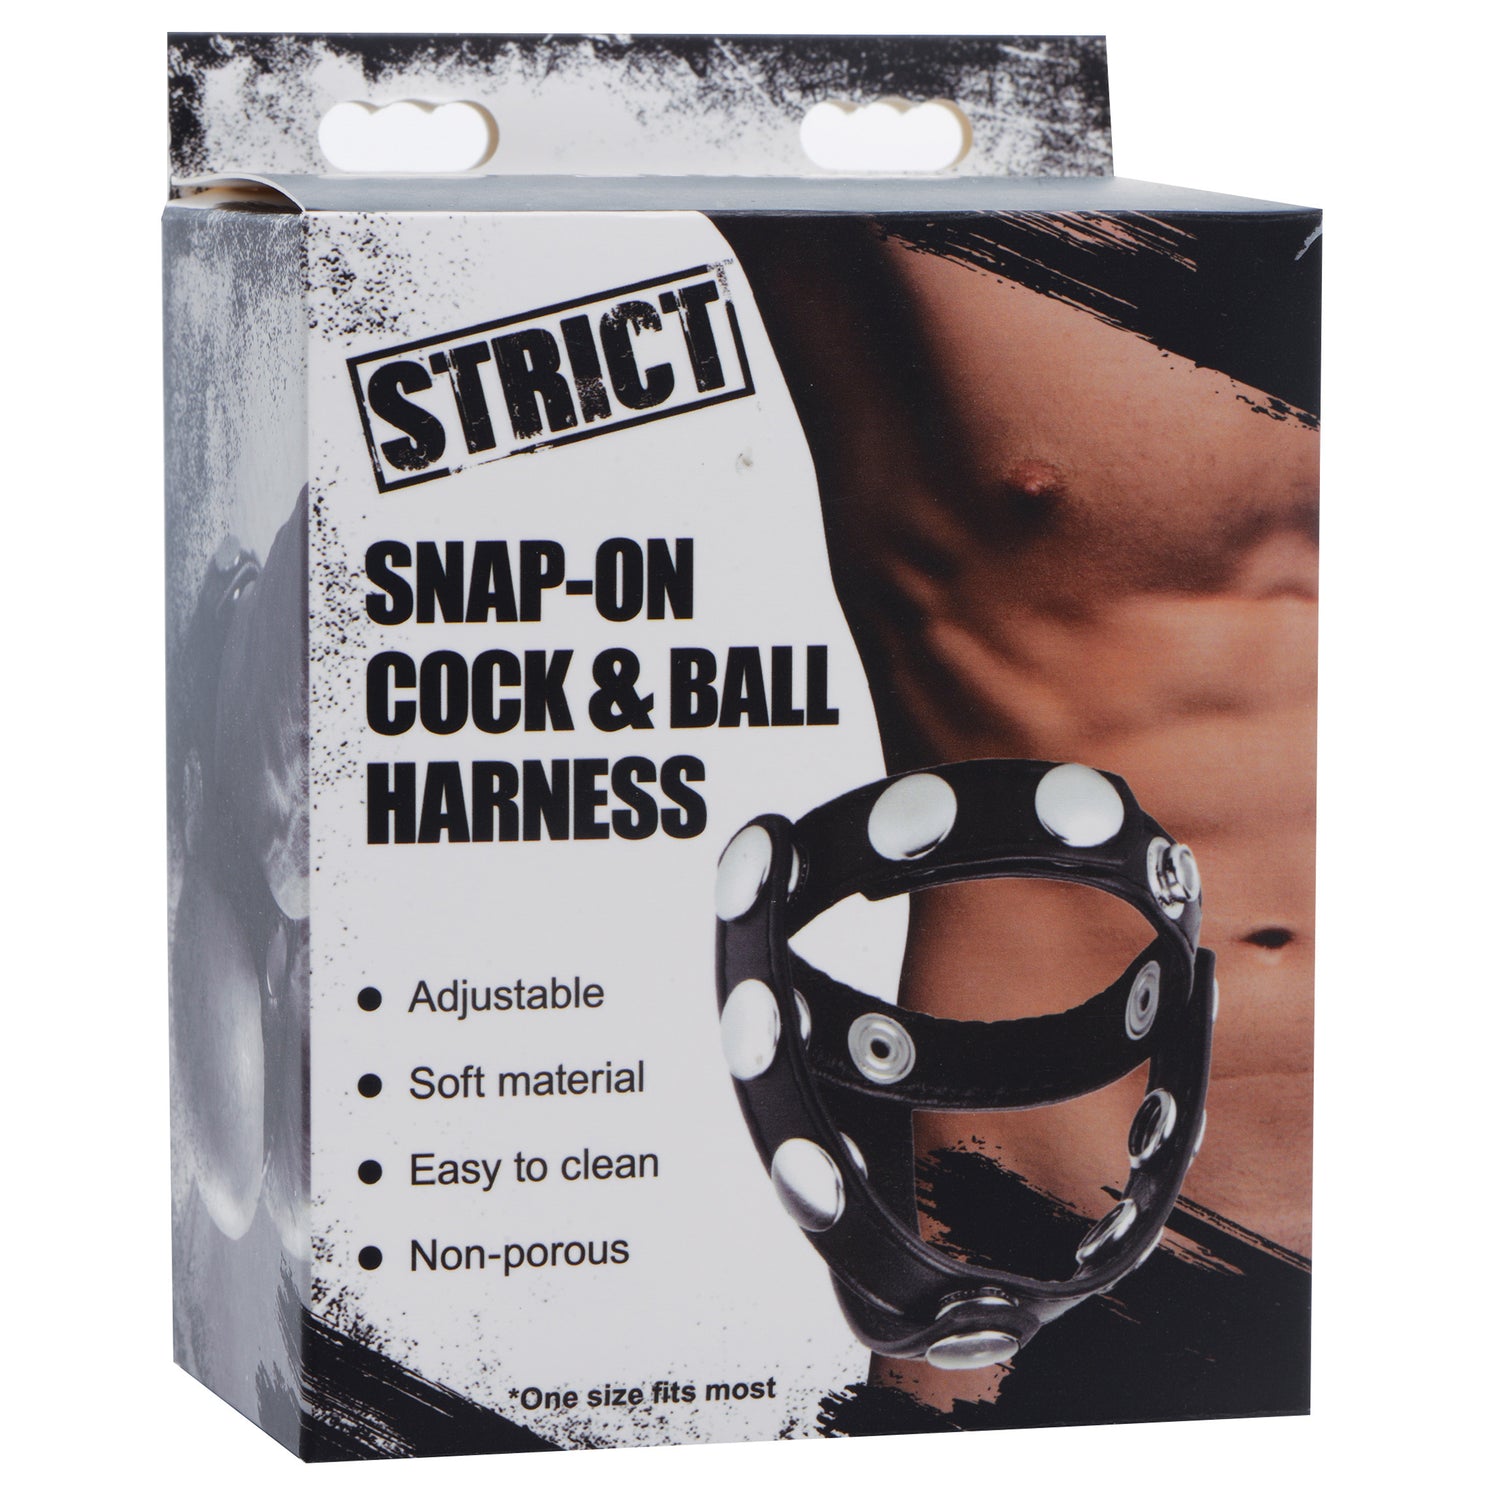 Snap-On Cock And Ball Harness - Just for you desires